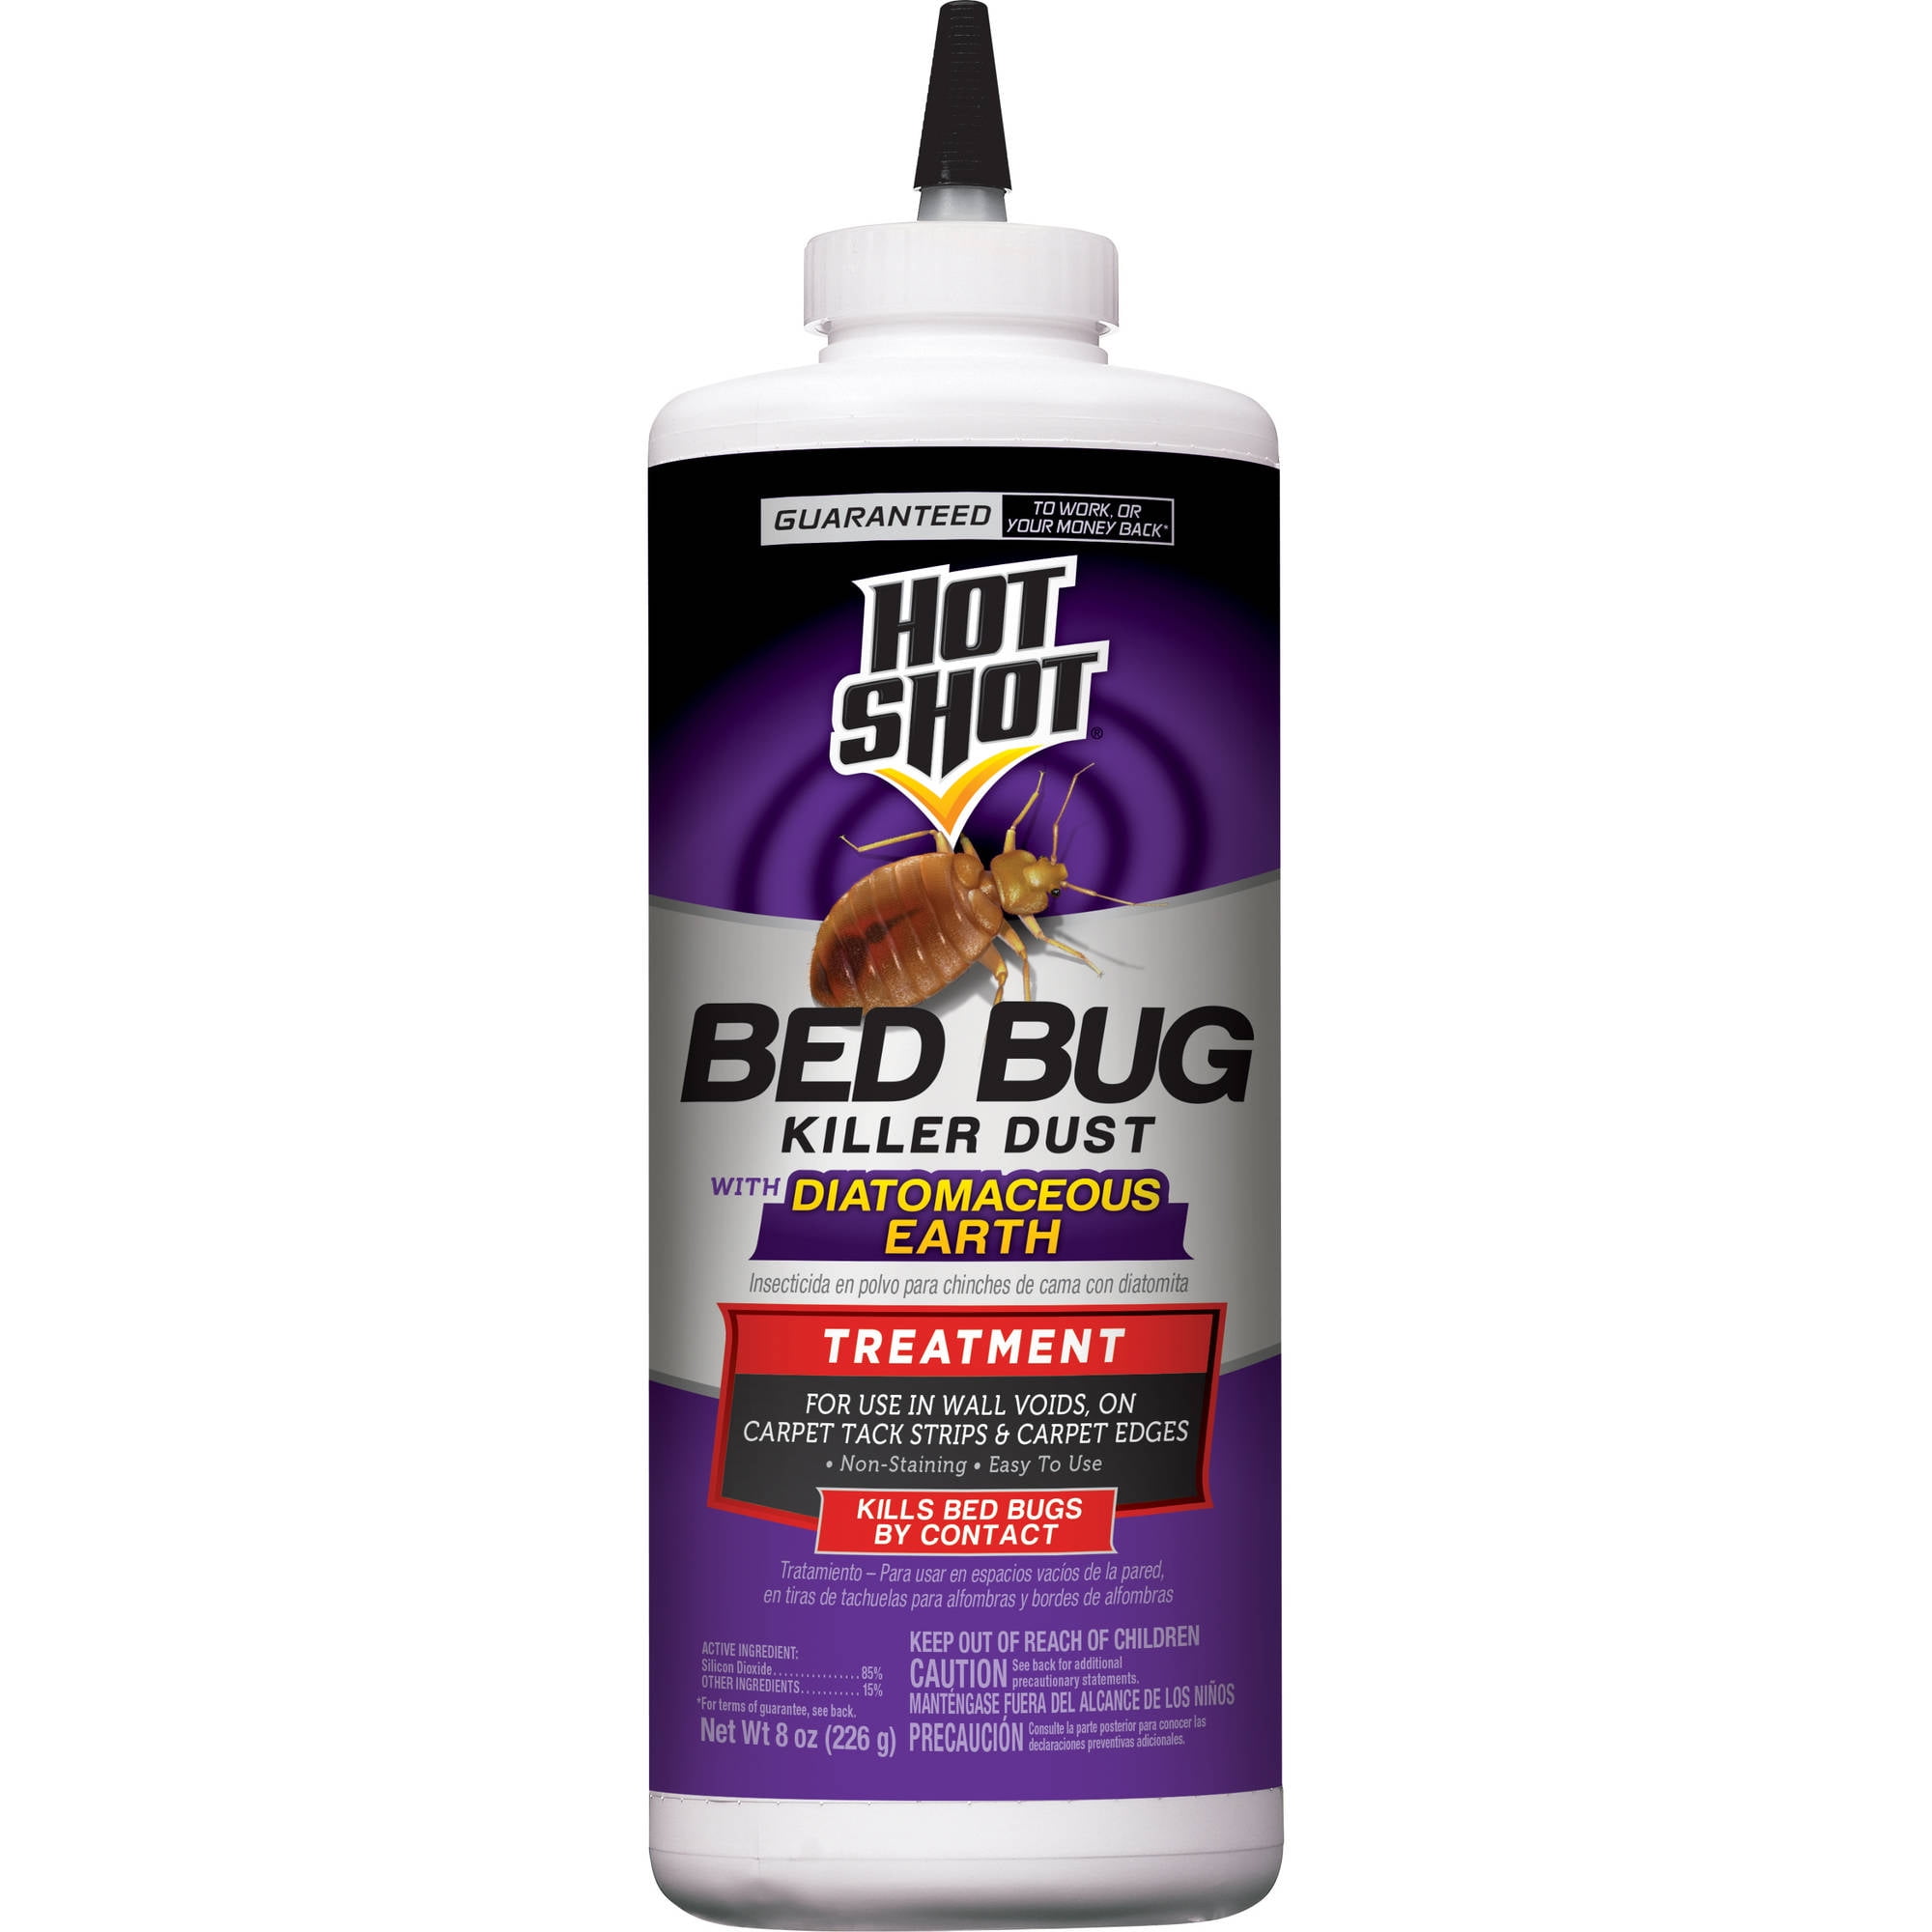 kills Bed Bugs Pack of 50 eggs and cockroaches Bed Bug Killer Powder 